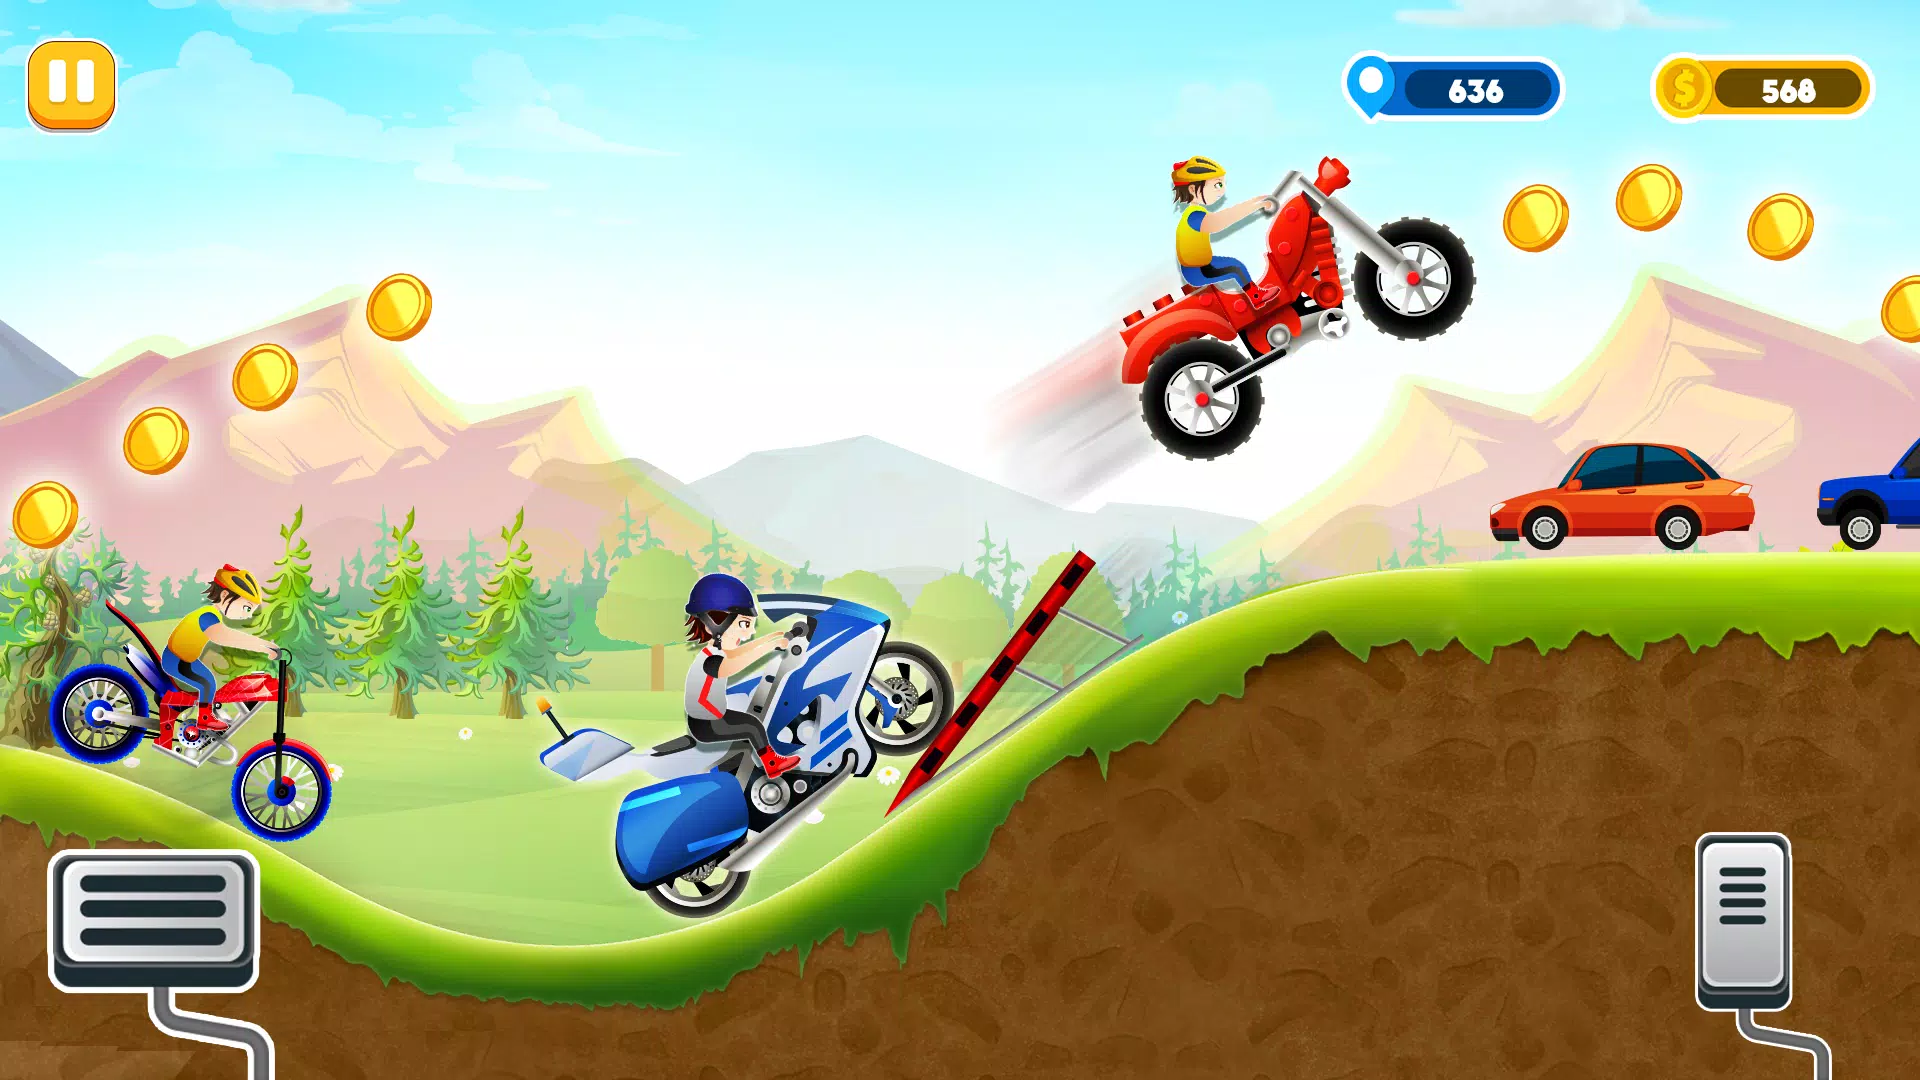 Bike Hill Racing Game For kids for Android - APK Download